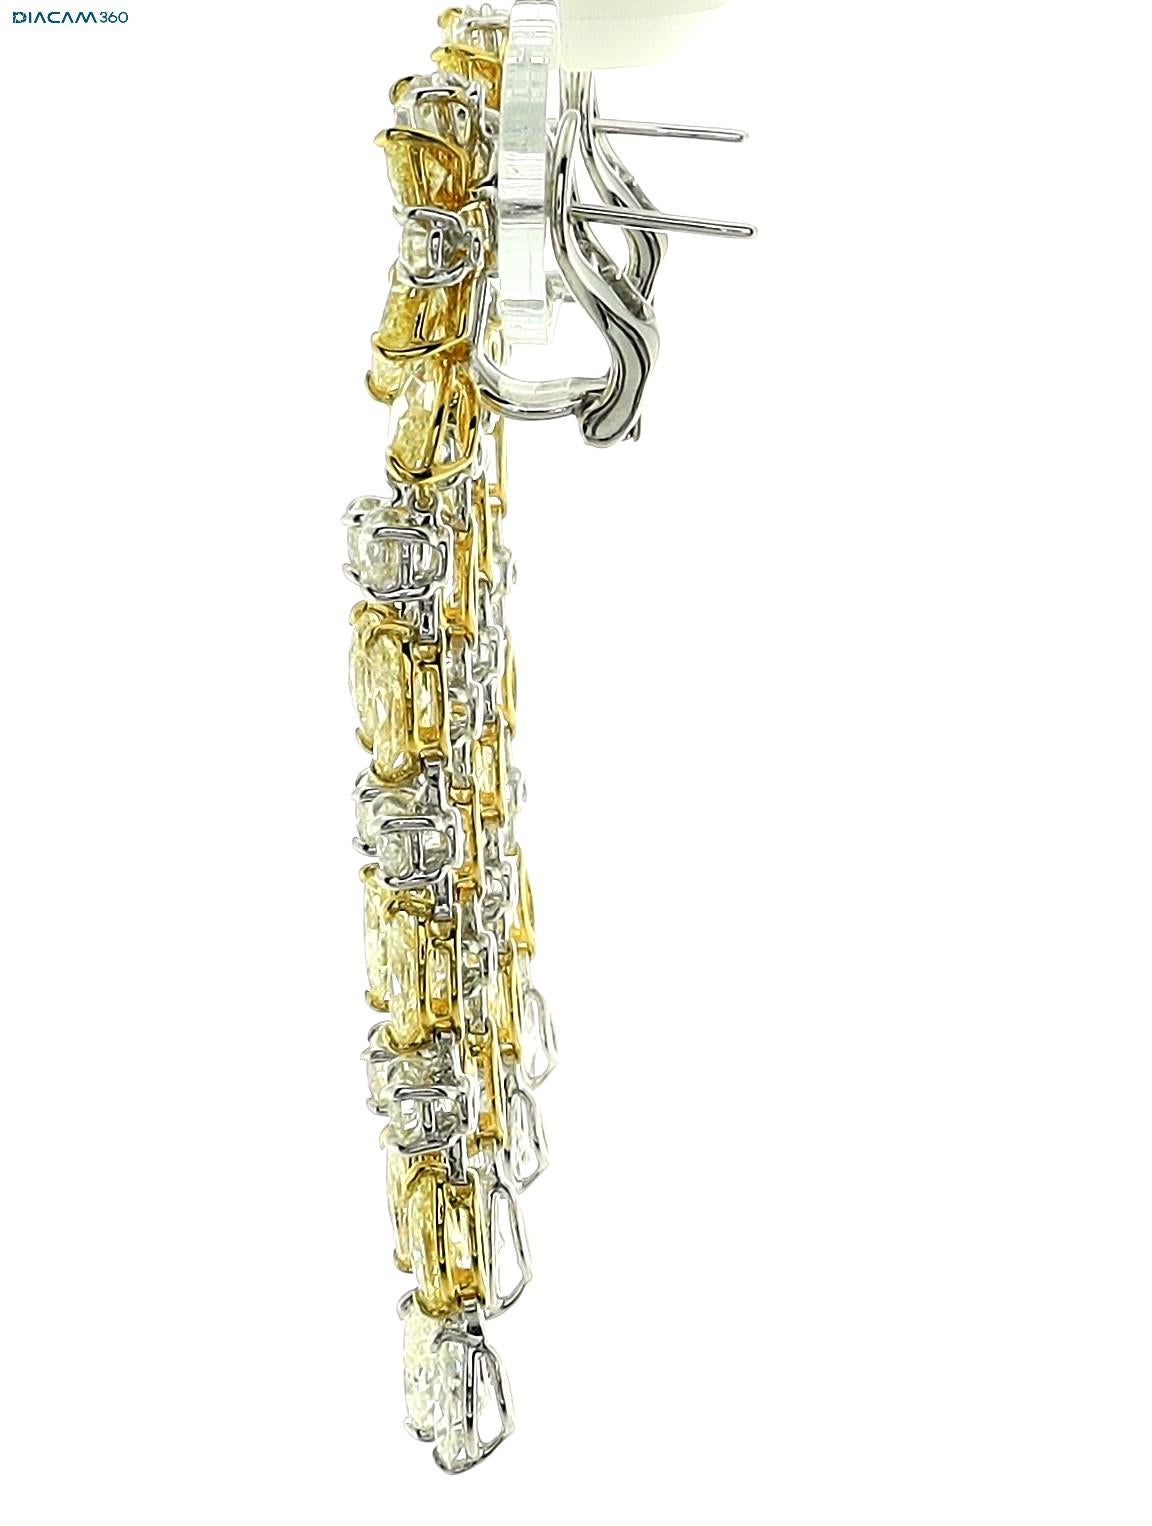 Earrings set in 18K Yellow Gold by Sophia D. The clip earrings feature a Yellow Diamond and Diamond that totals 22.10 carats. 

Measures approximately 3.0